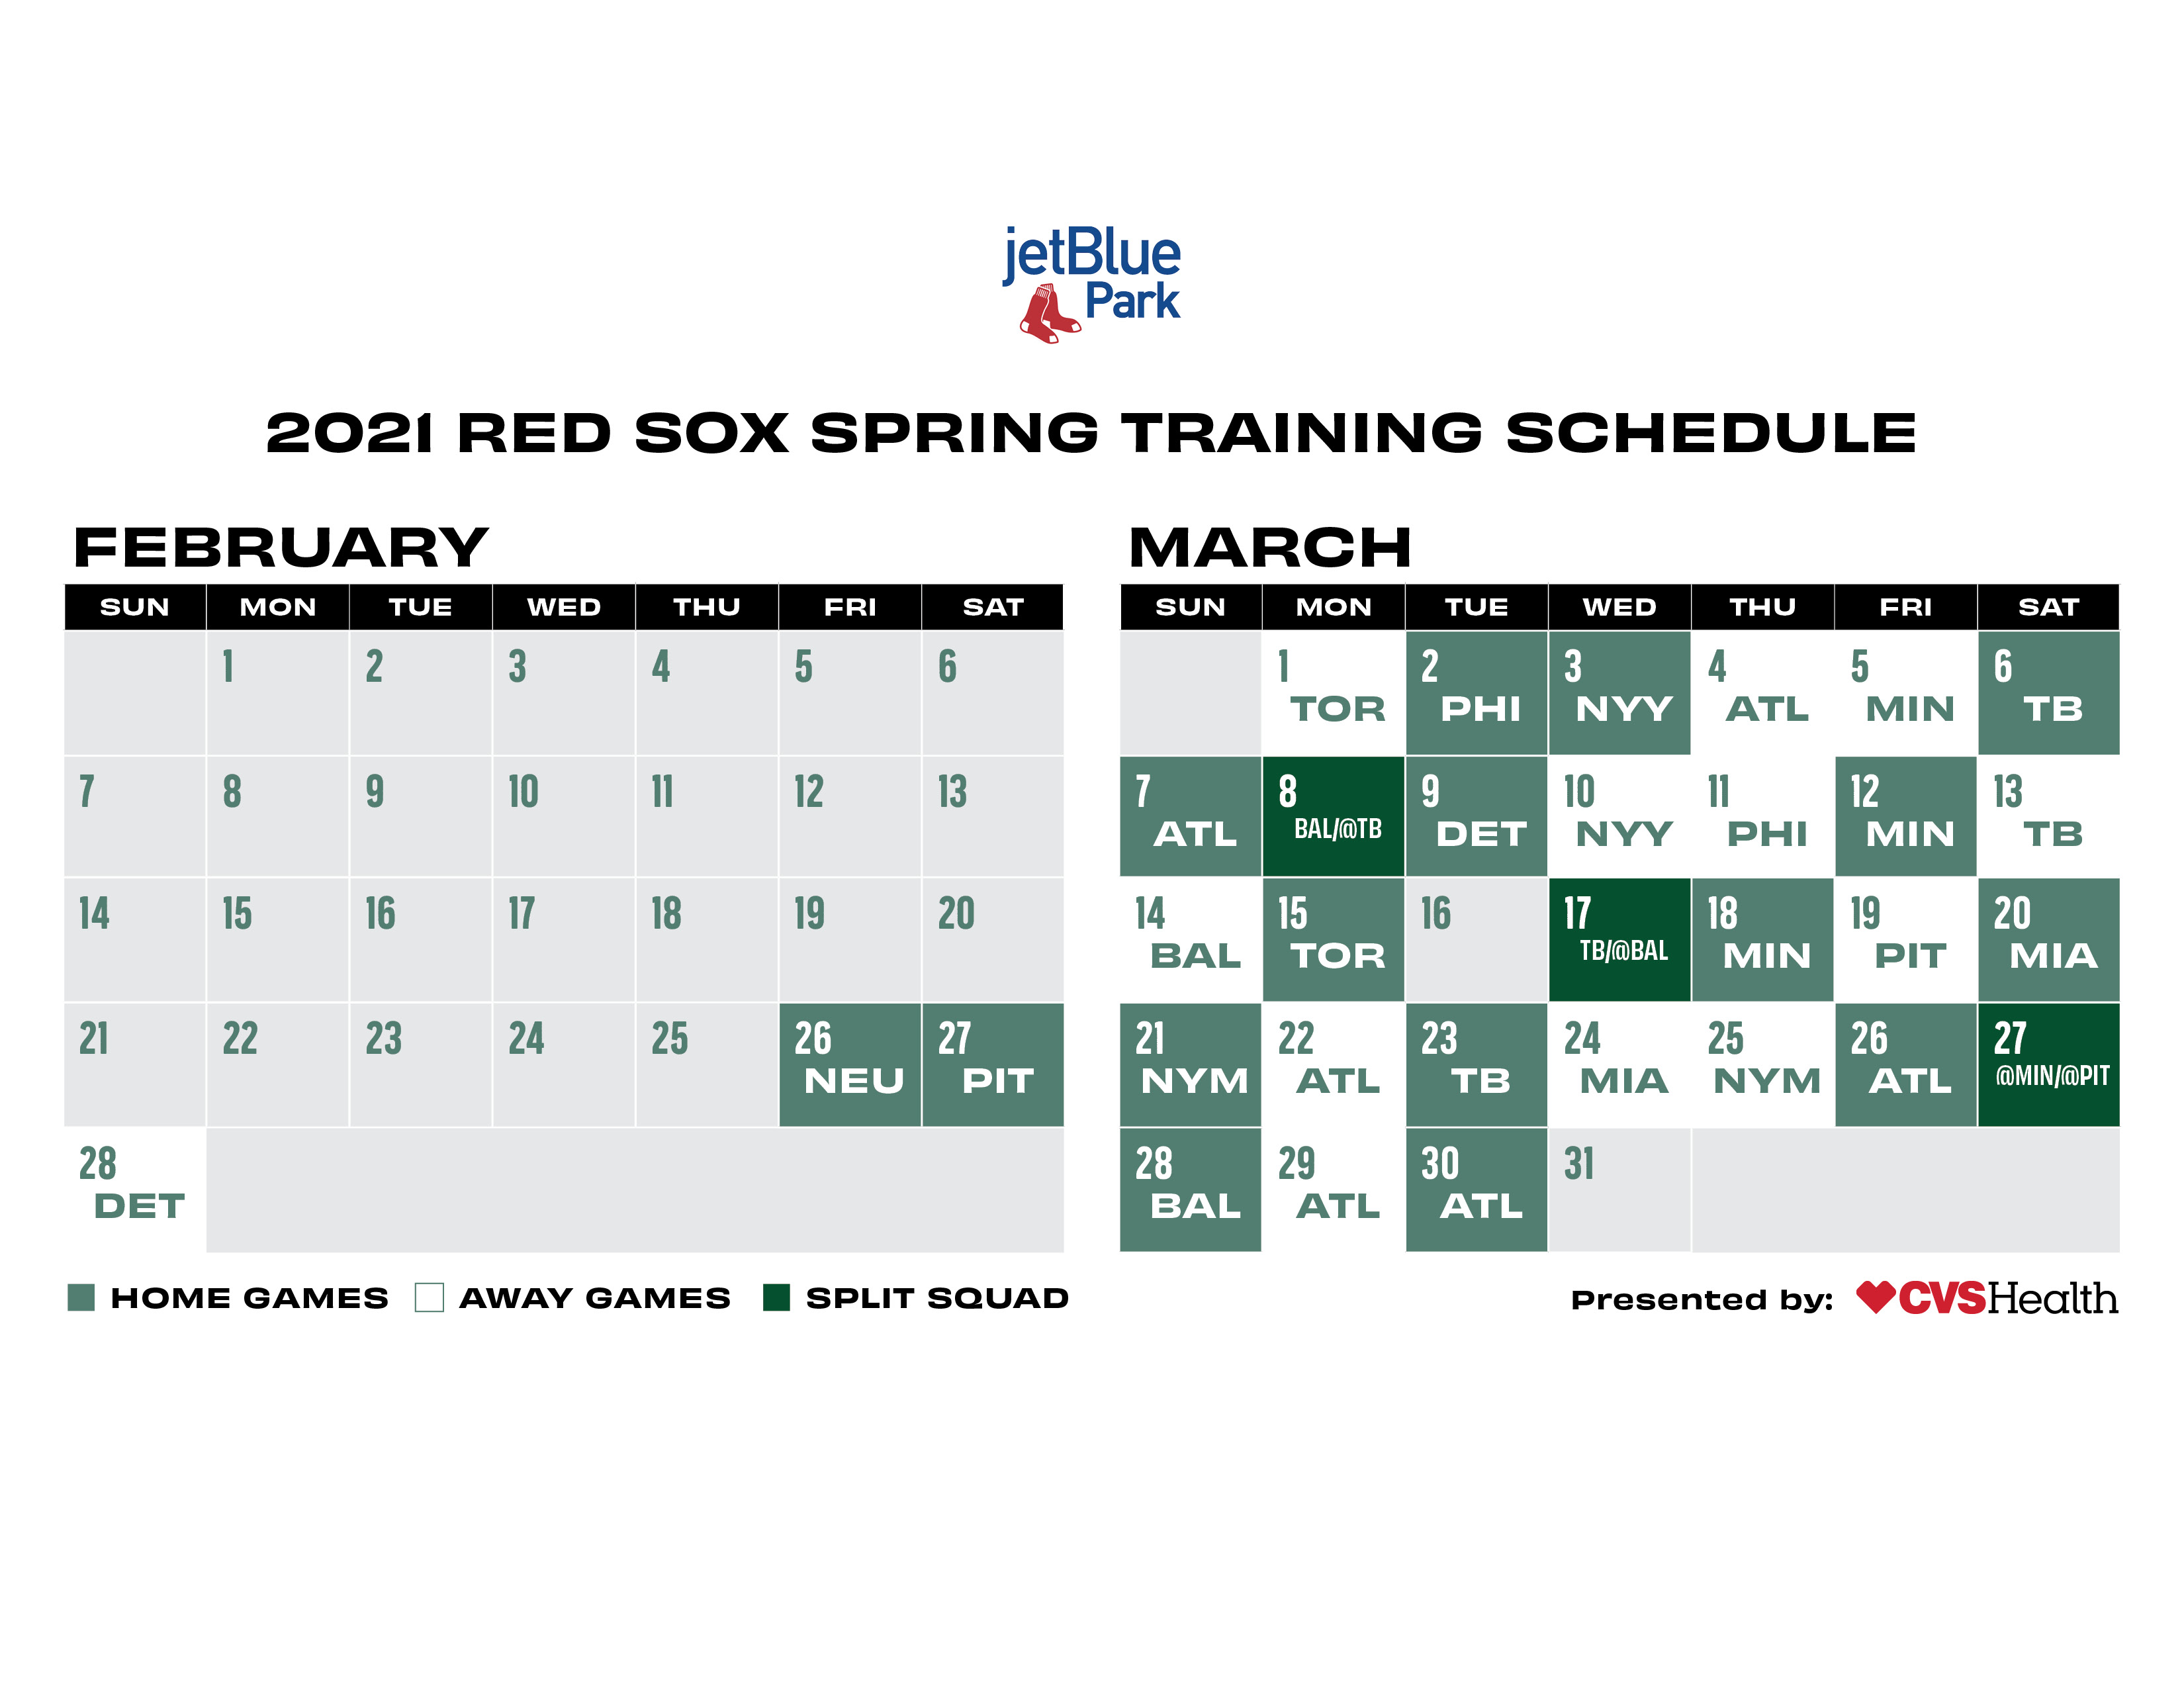 10 Reasons to go to a Red Sox Spring Training Game